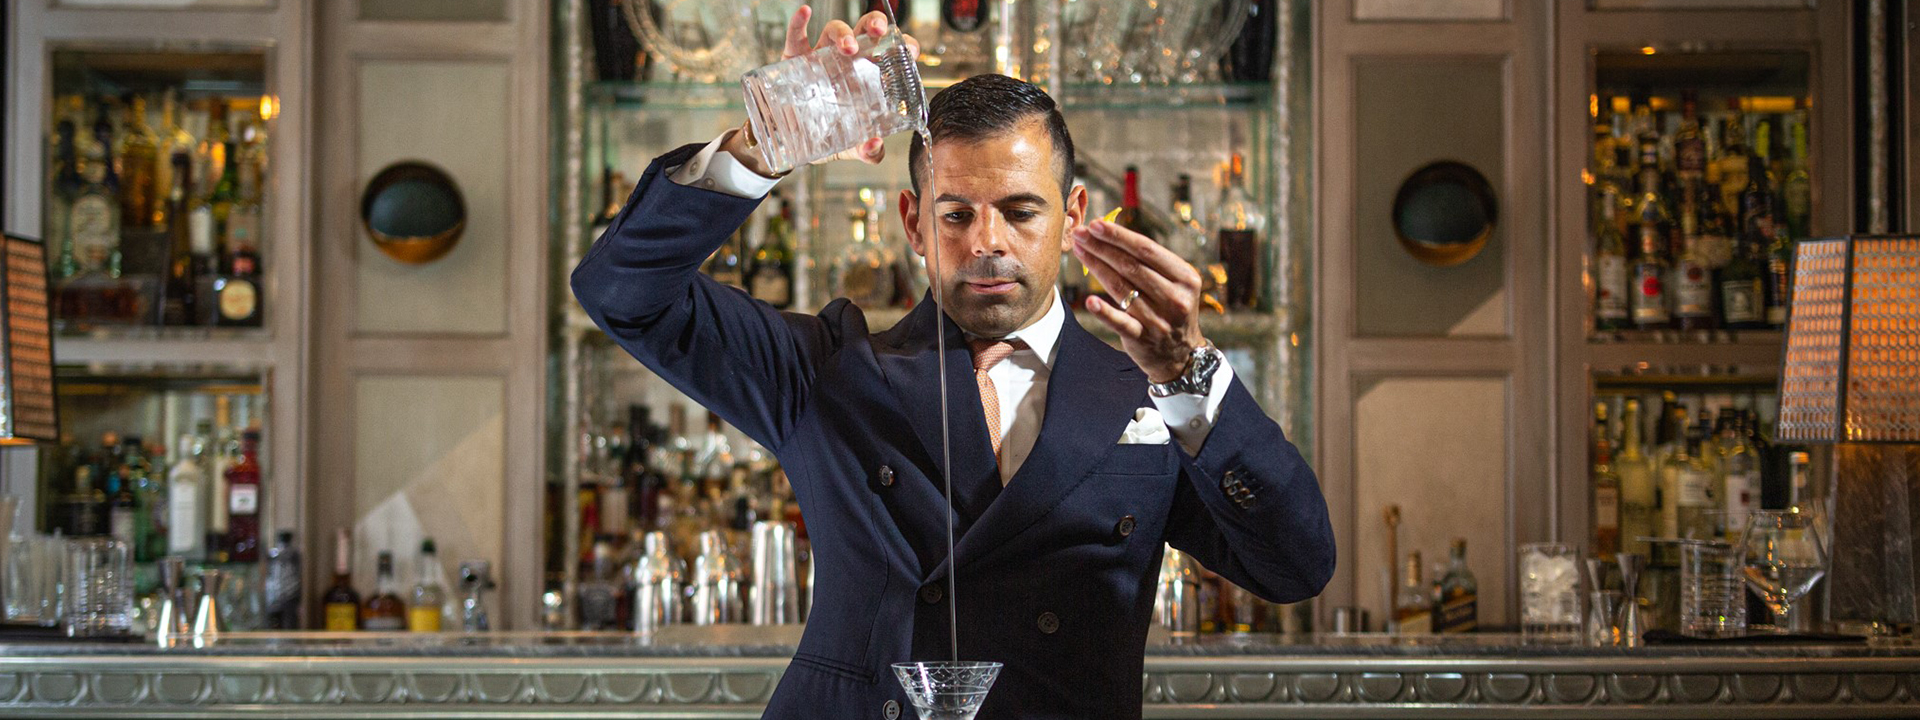 A bartender dressed in a suit, pouring a drink from a vessel to a glass.